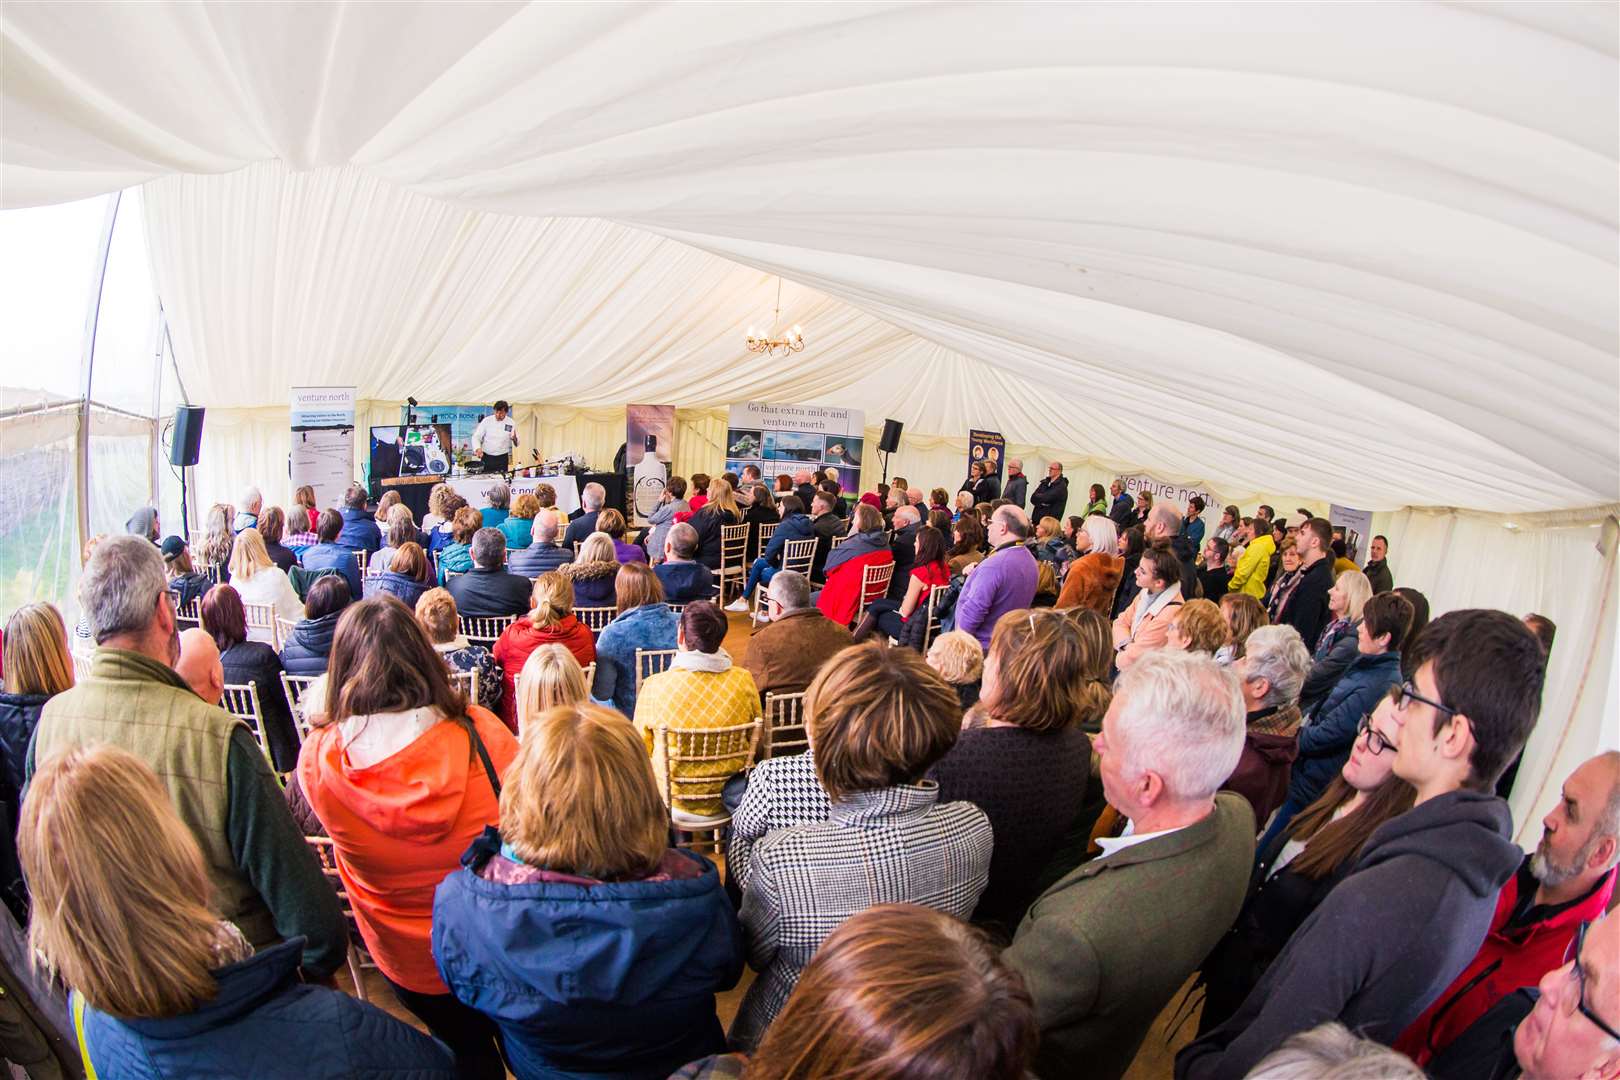 The packed Taste North Cookery Theatre at John O'Groats in 2019 during a cookery demonstration by Jean-Christophe Novelli.